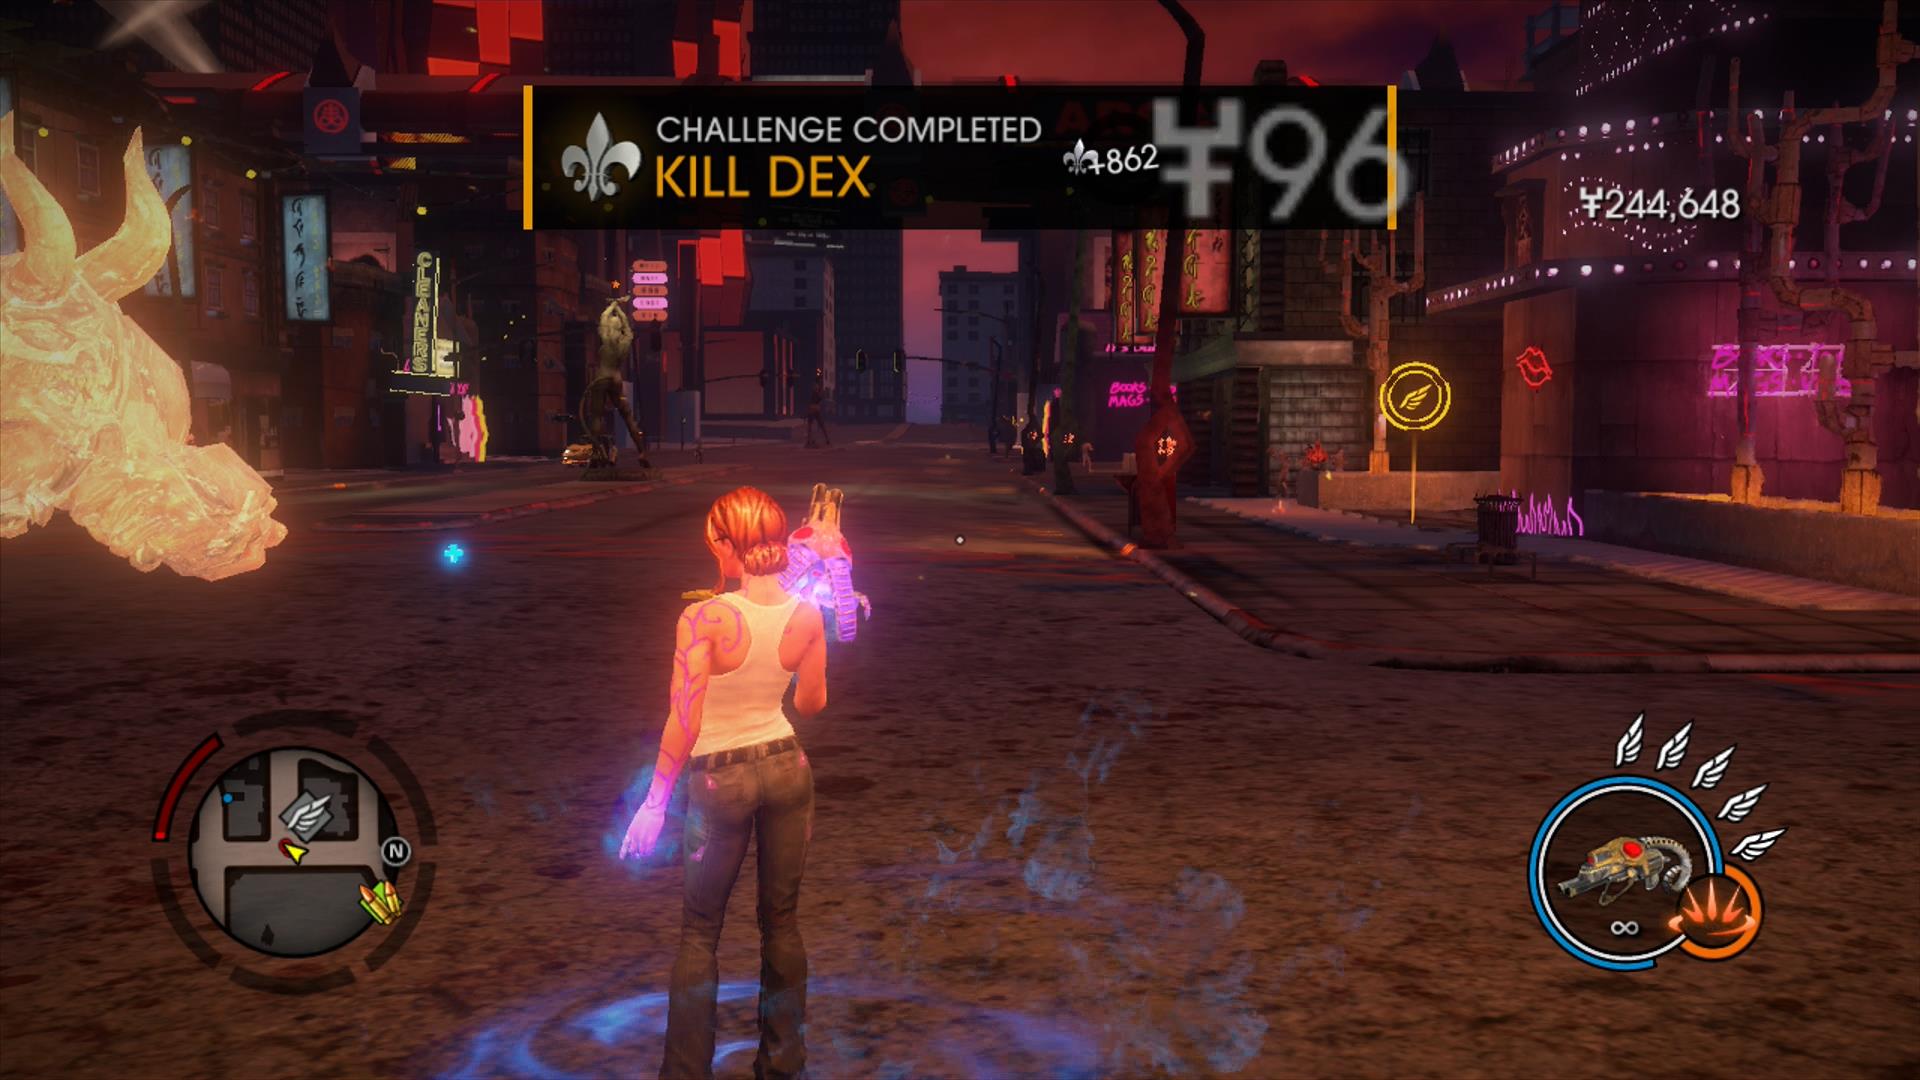 Saint Row Looks Like One Hell of a Time, GamePlay Overview